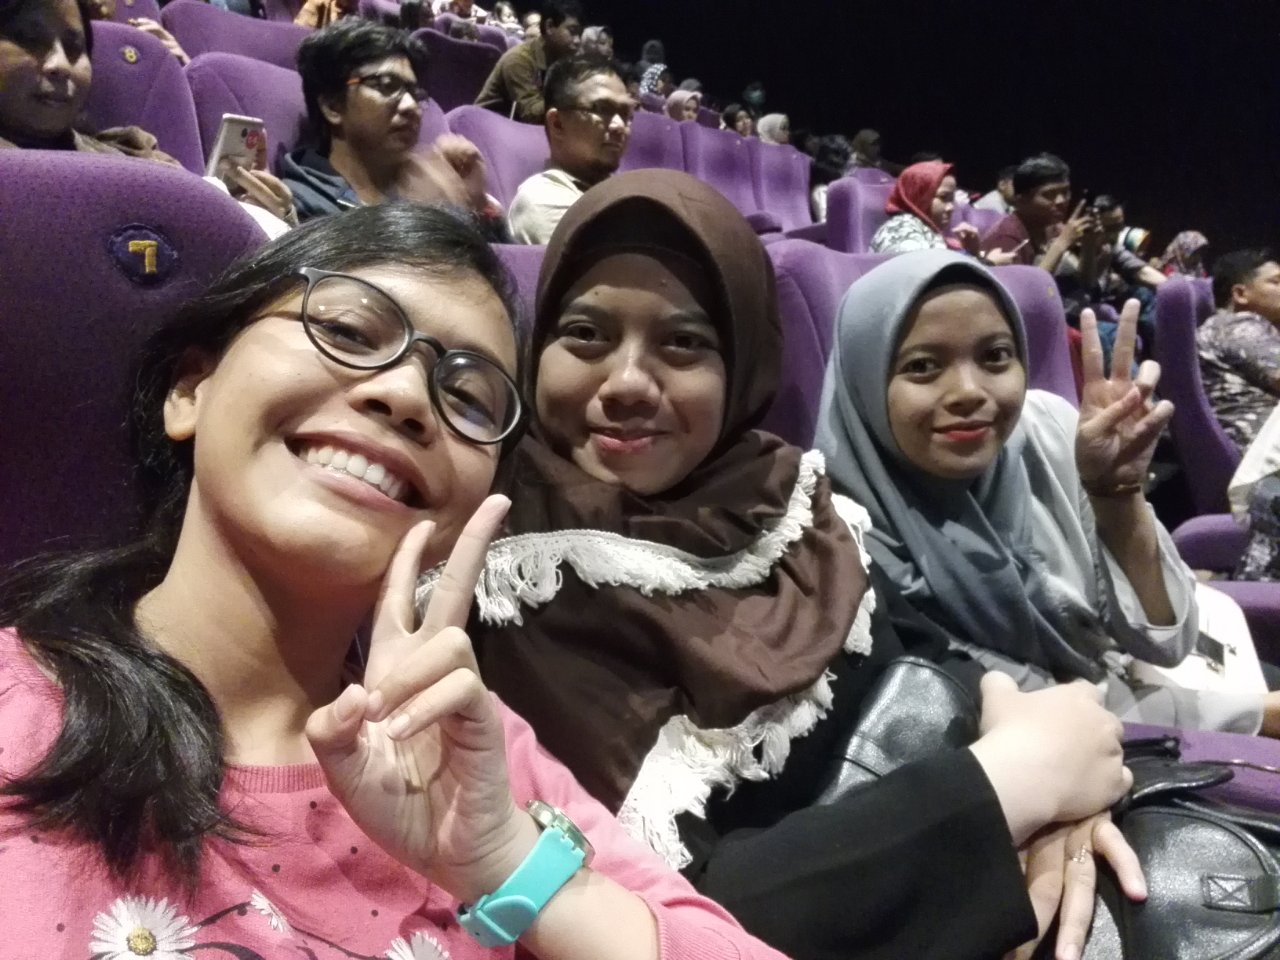 &#91;FR&#93; KASKUS Movie Night Out &quot;Disney's The Nutcracker and The Four Realms